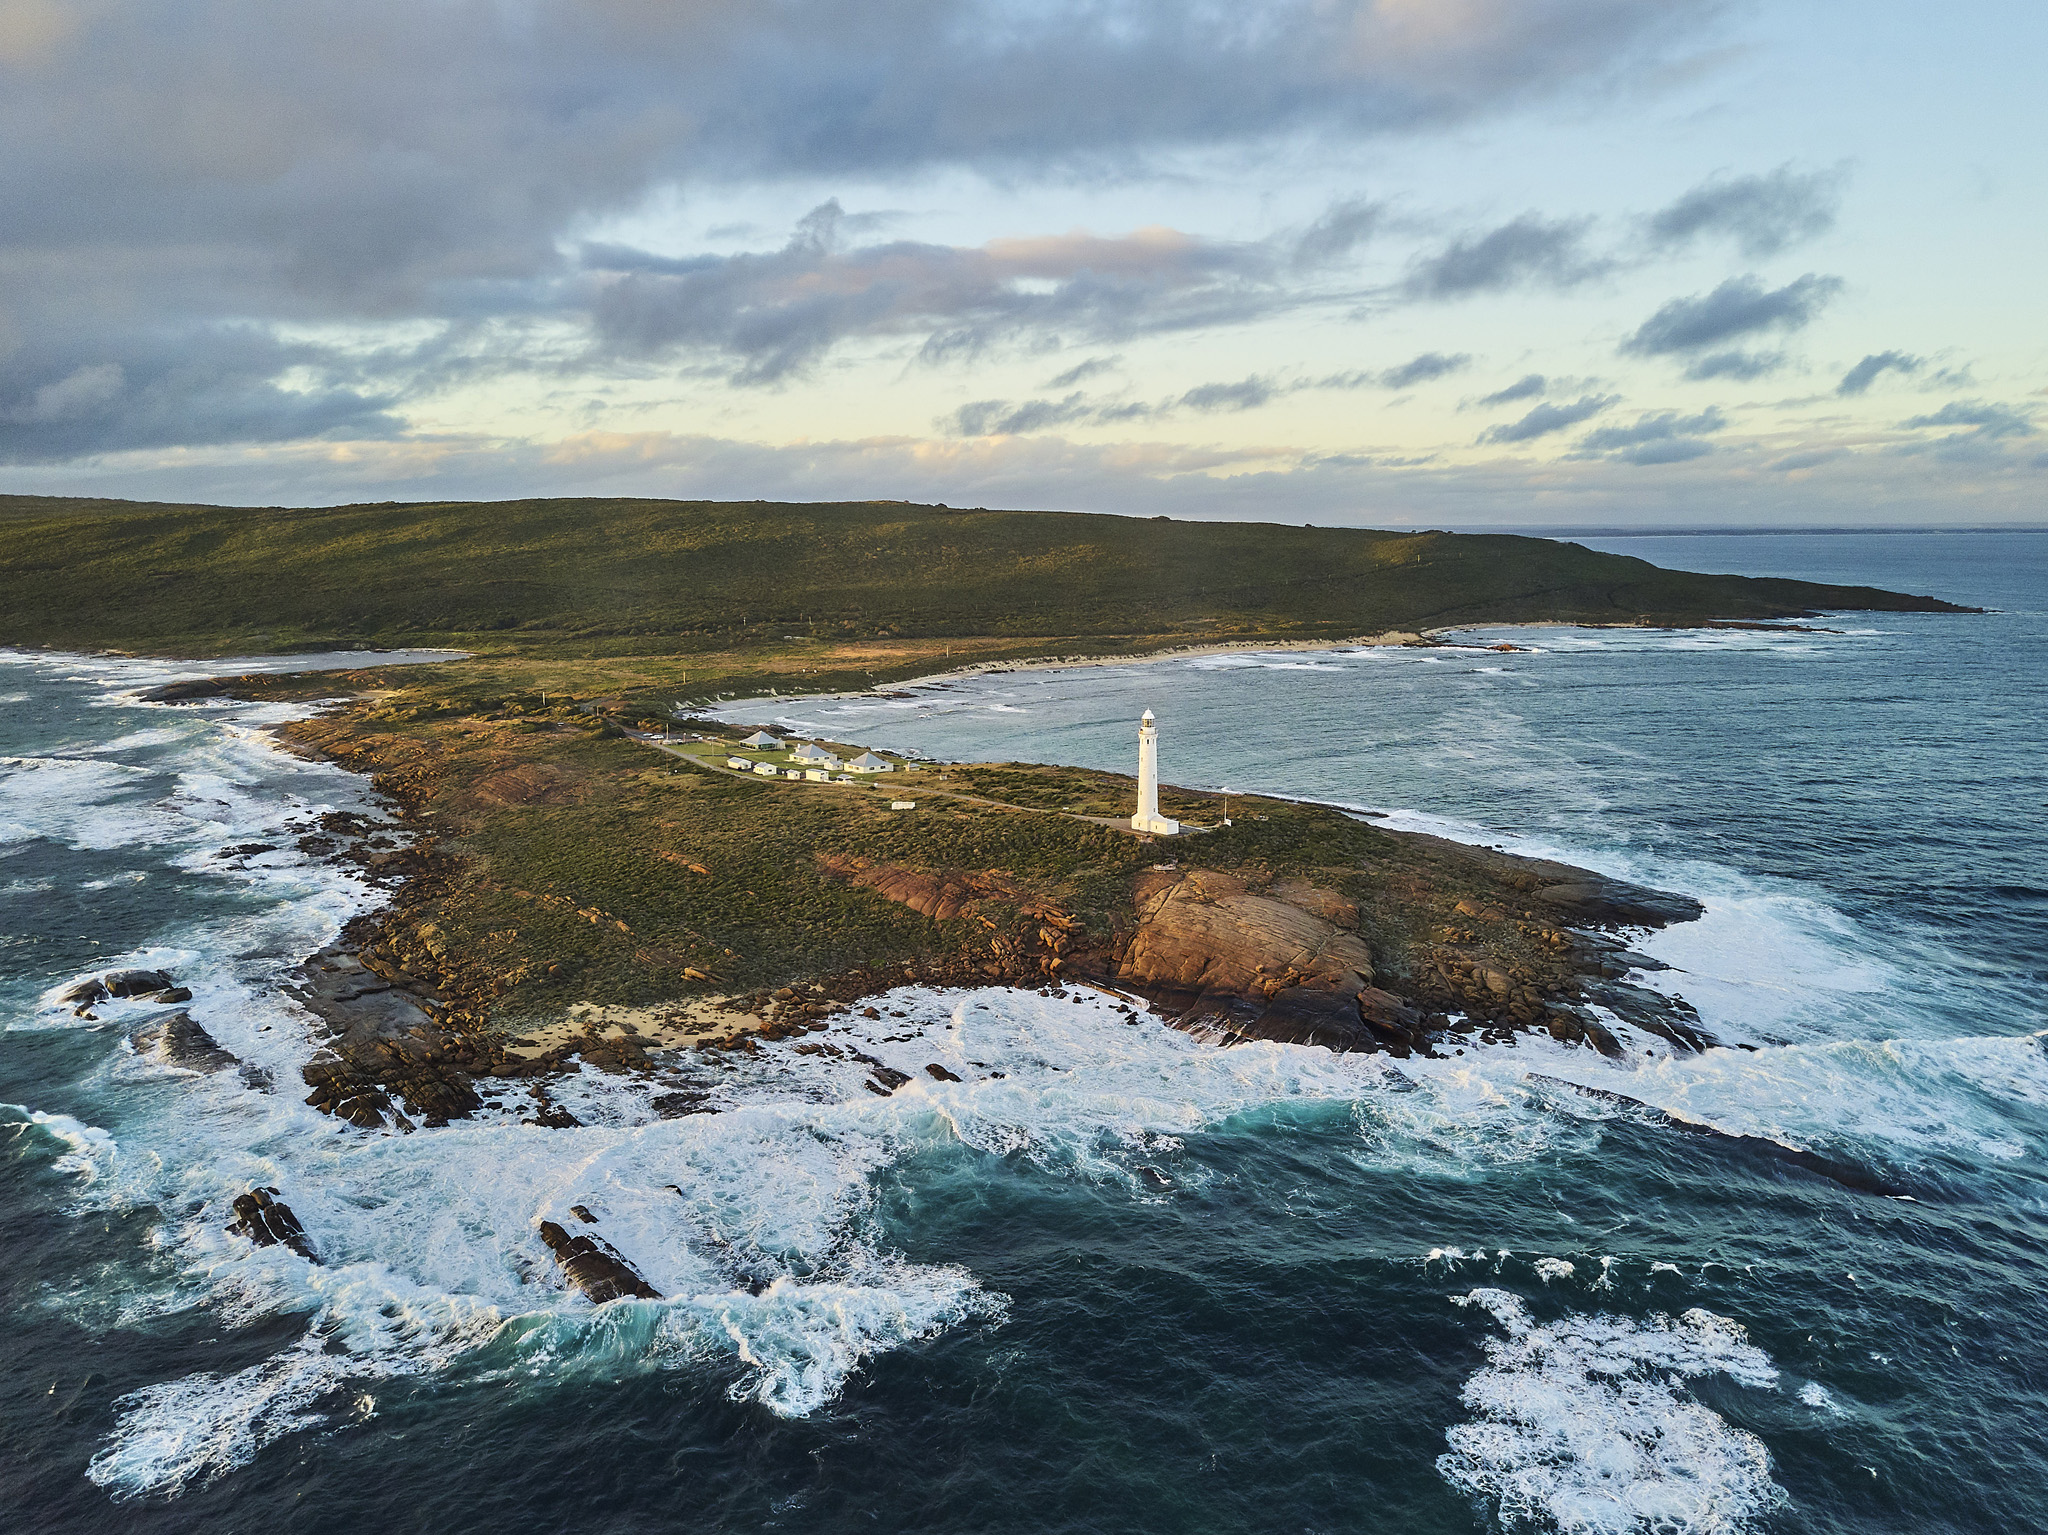 Cape Leeuwin Lighthouse Fully Guided Tower Tour